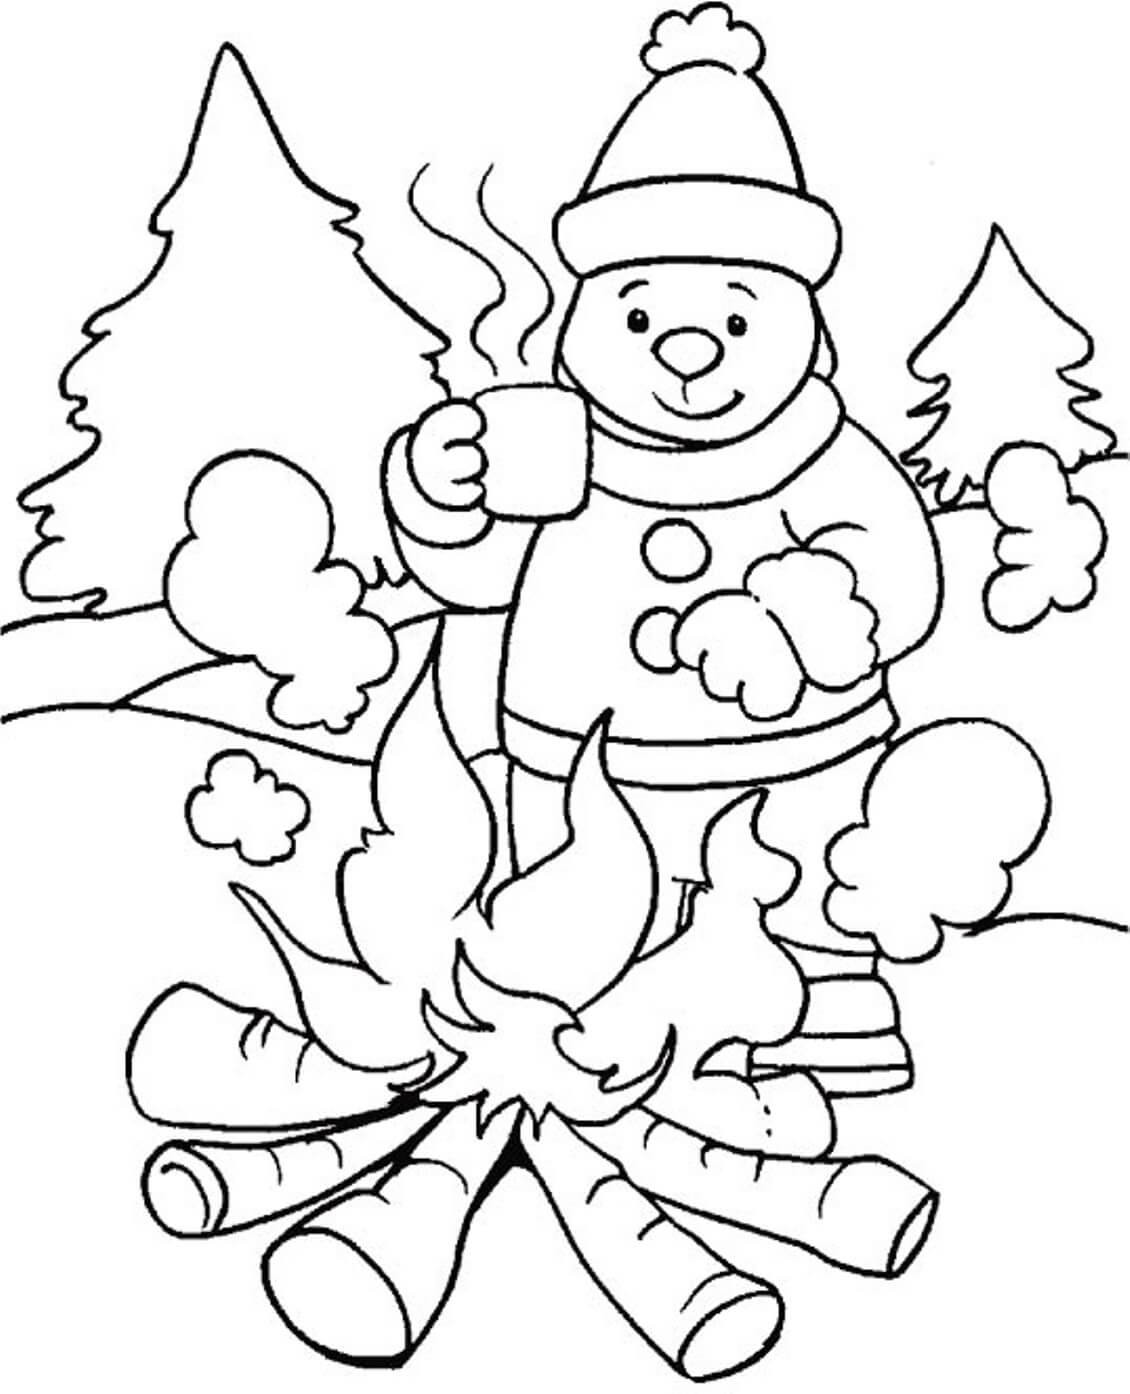 Winter Coloring Sheets Free Printable
 Free Printable Winter Coloring Pages